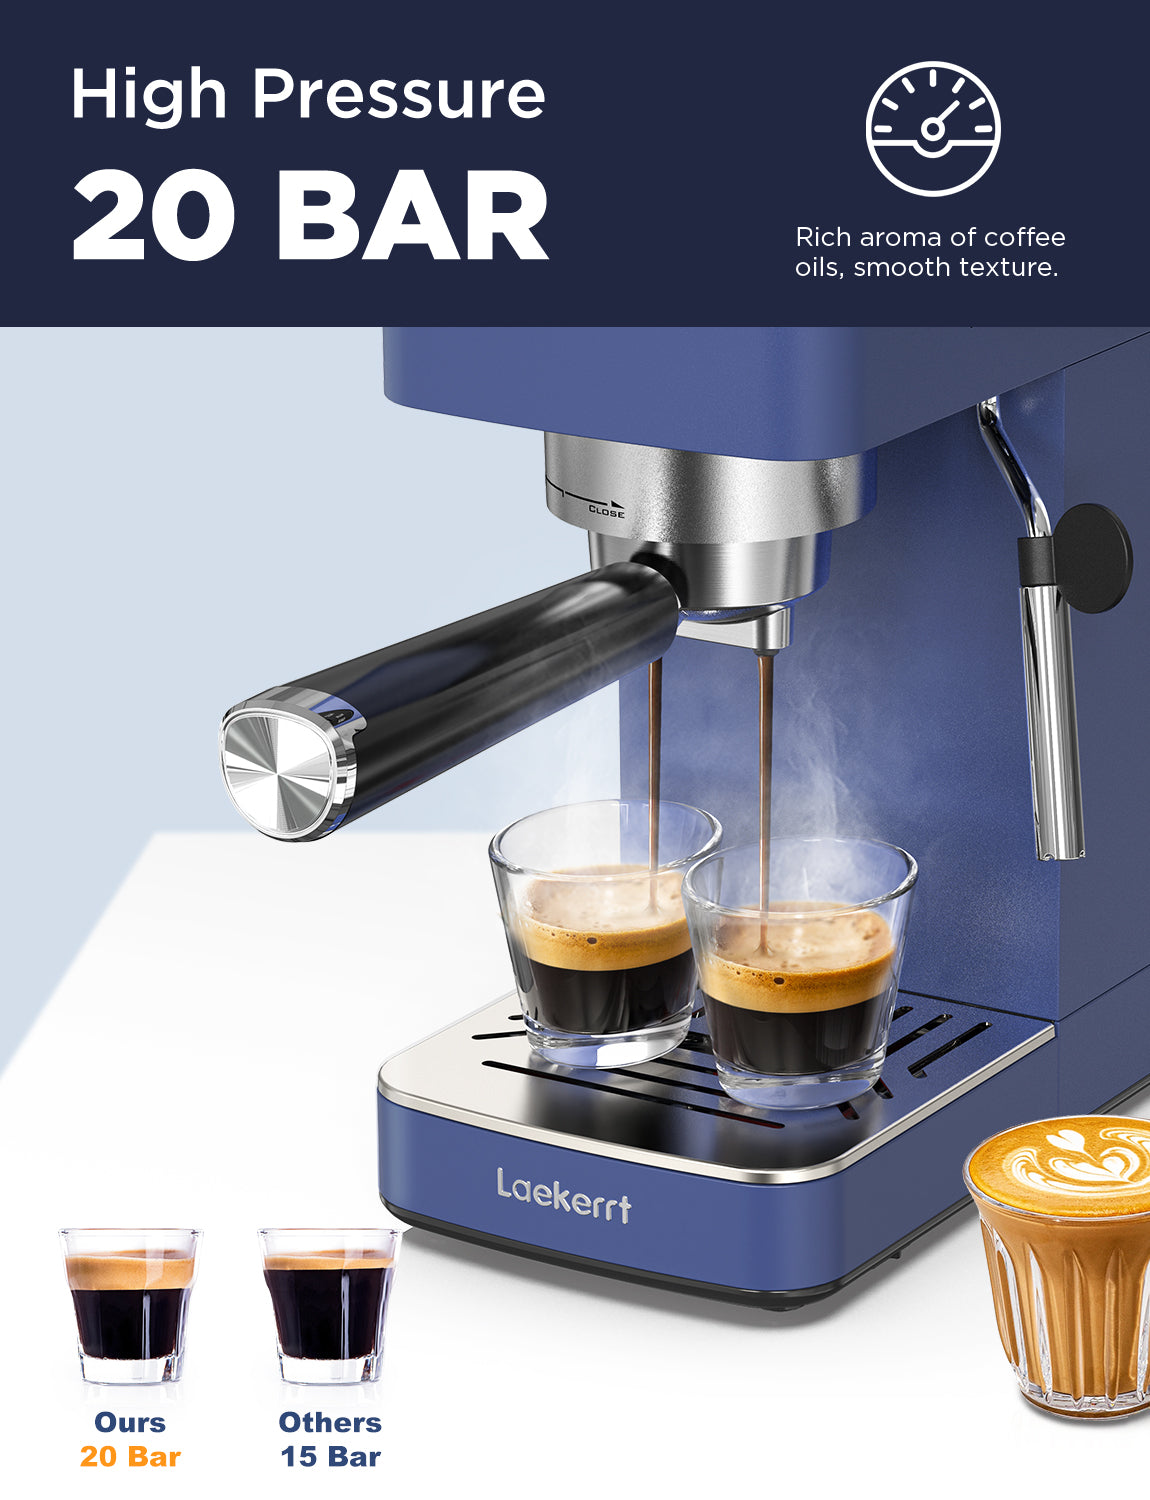 Laekerrt Espresso Machine 20 Bar Espresso Maker with Milk Frother Steam Wand, Compact Espresso Coffee Machine for Cappuccino and Latte (Navy Blue, CMEP04)